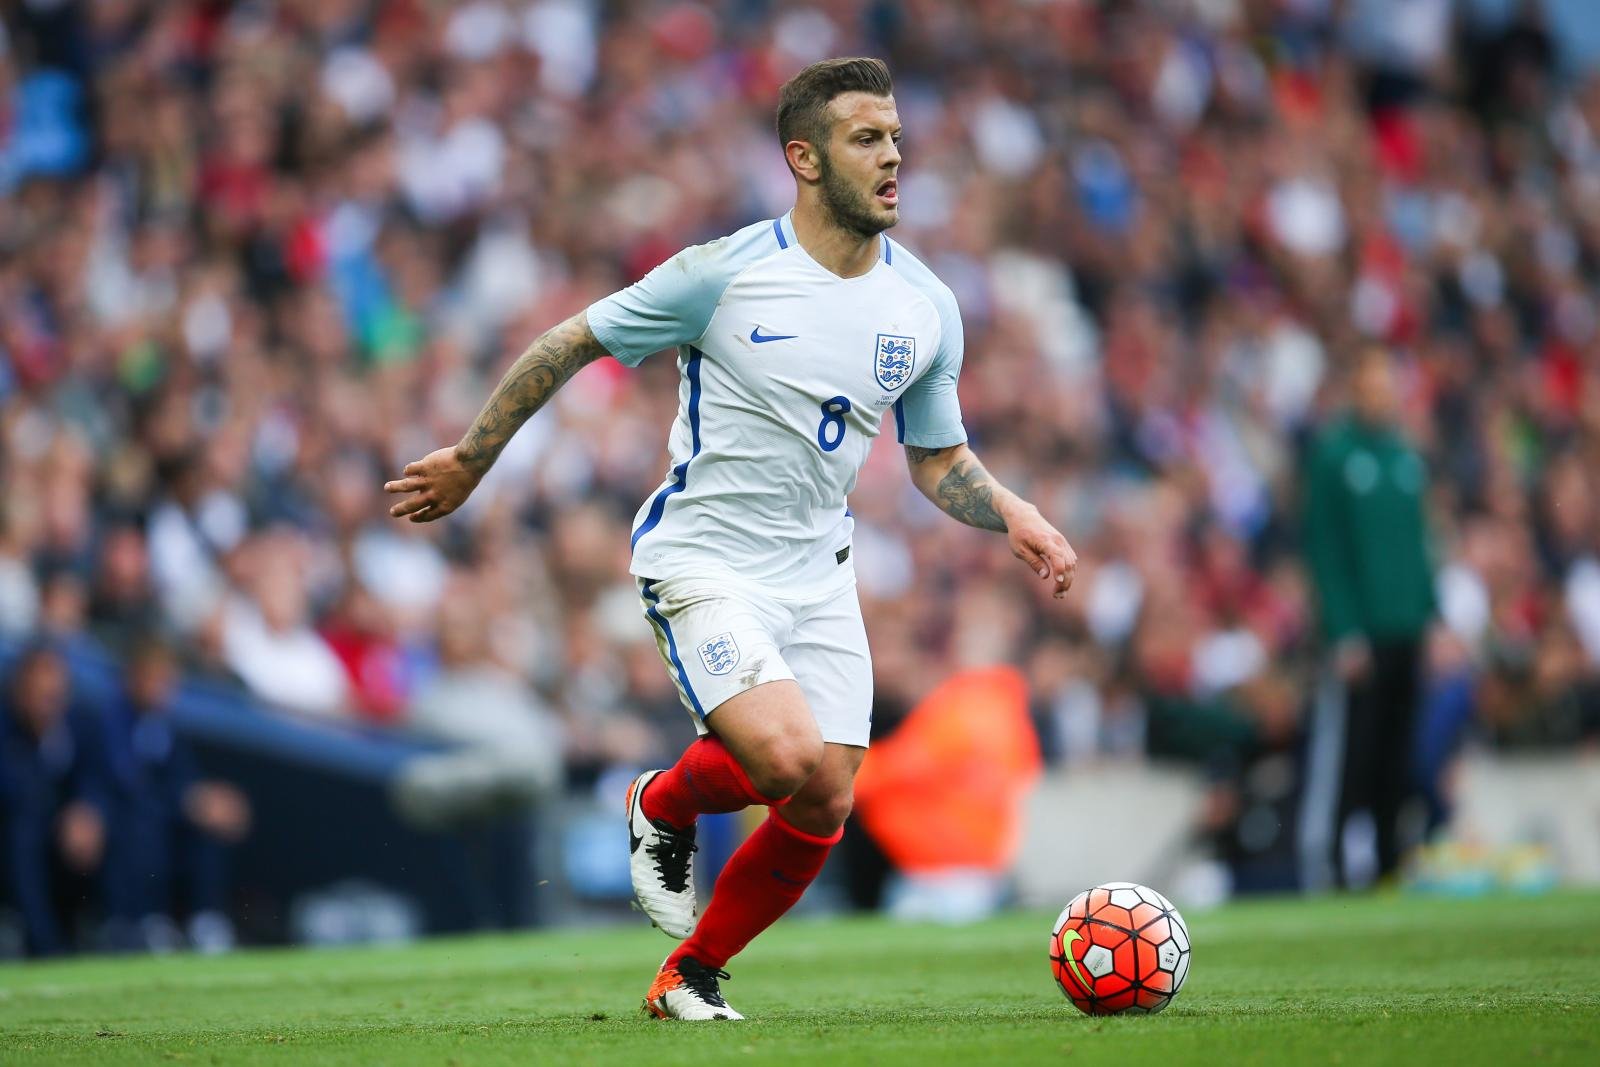 Arsenal’s Wilshere decision expected within hours, set to join Premier League rivals